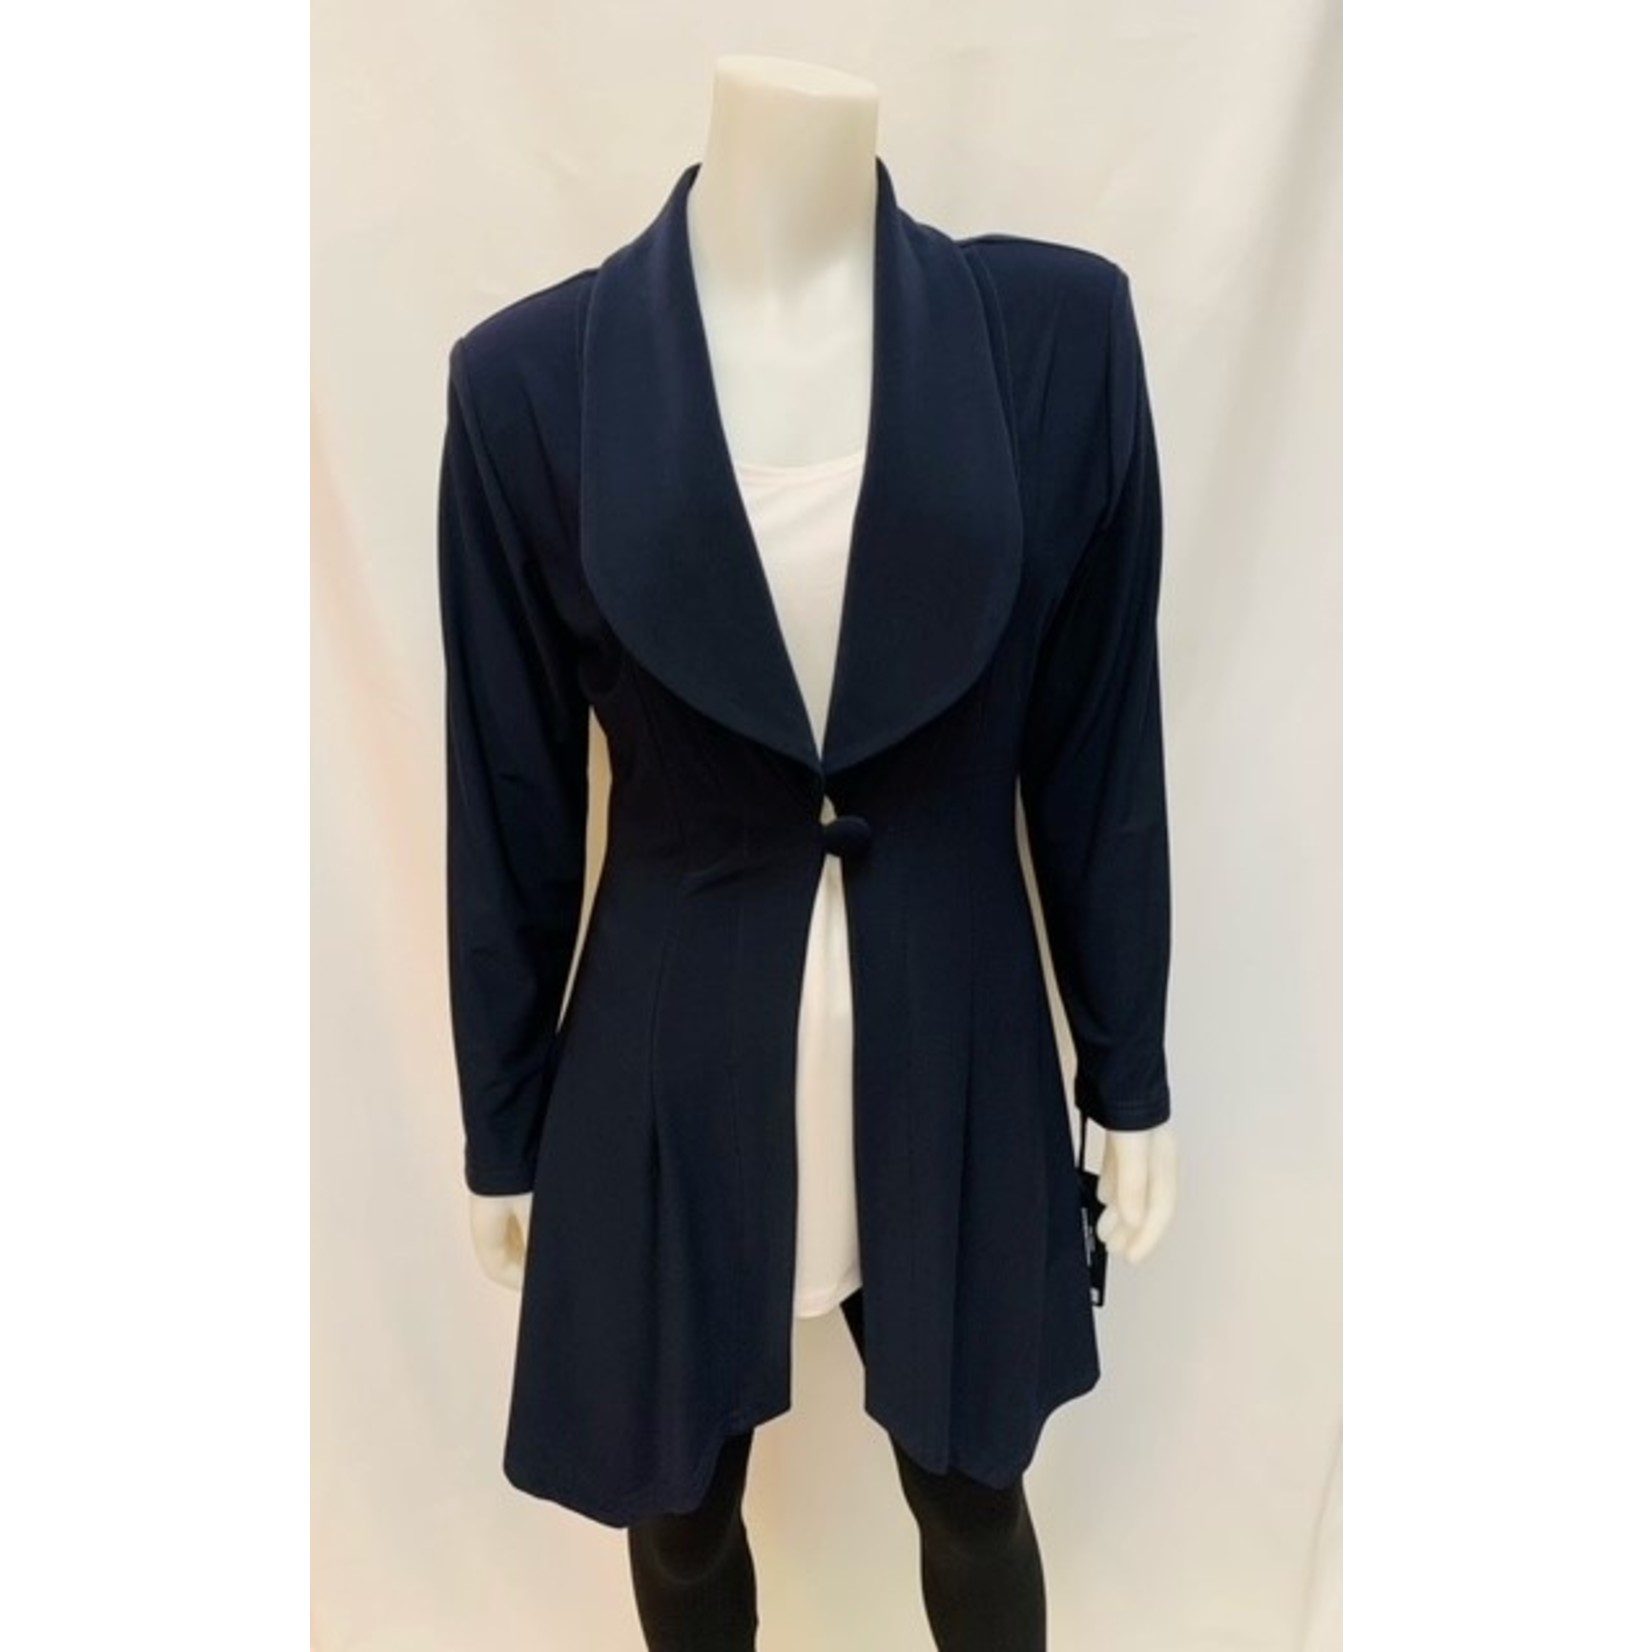 Artex long blazer with one front button